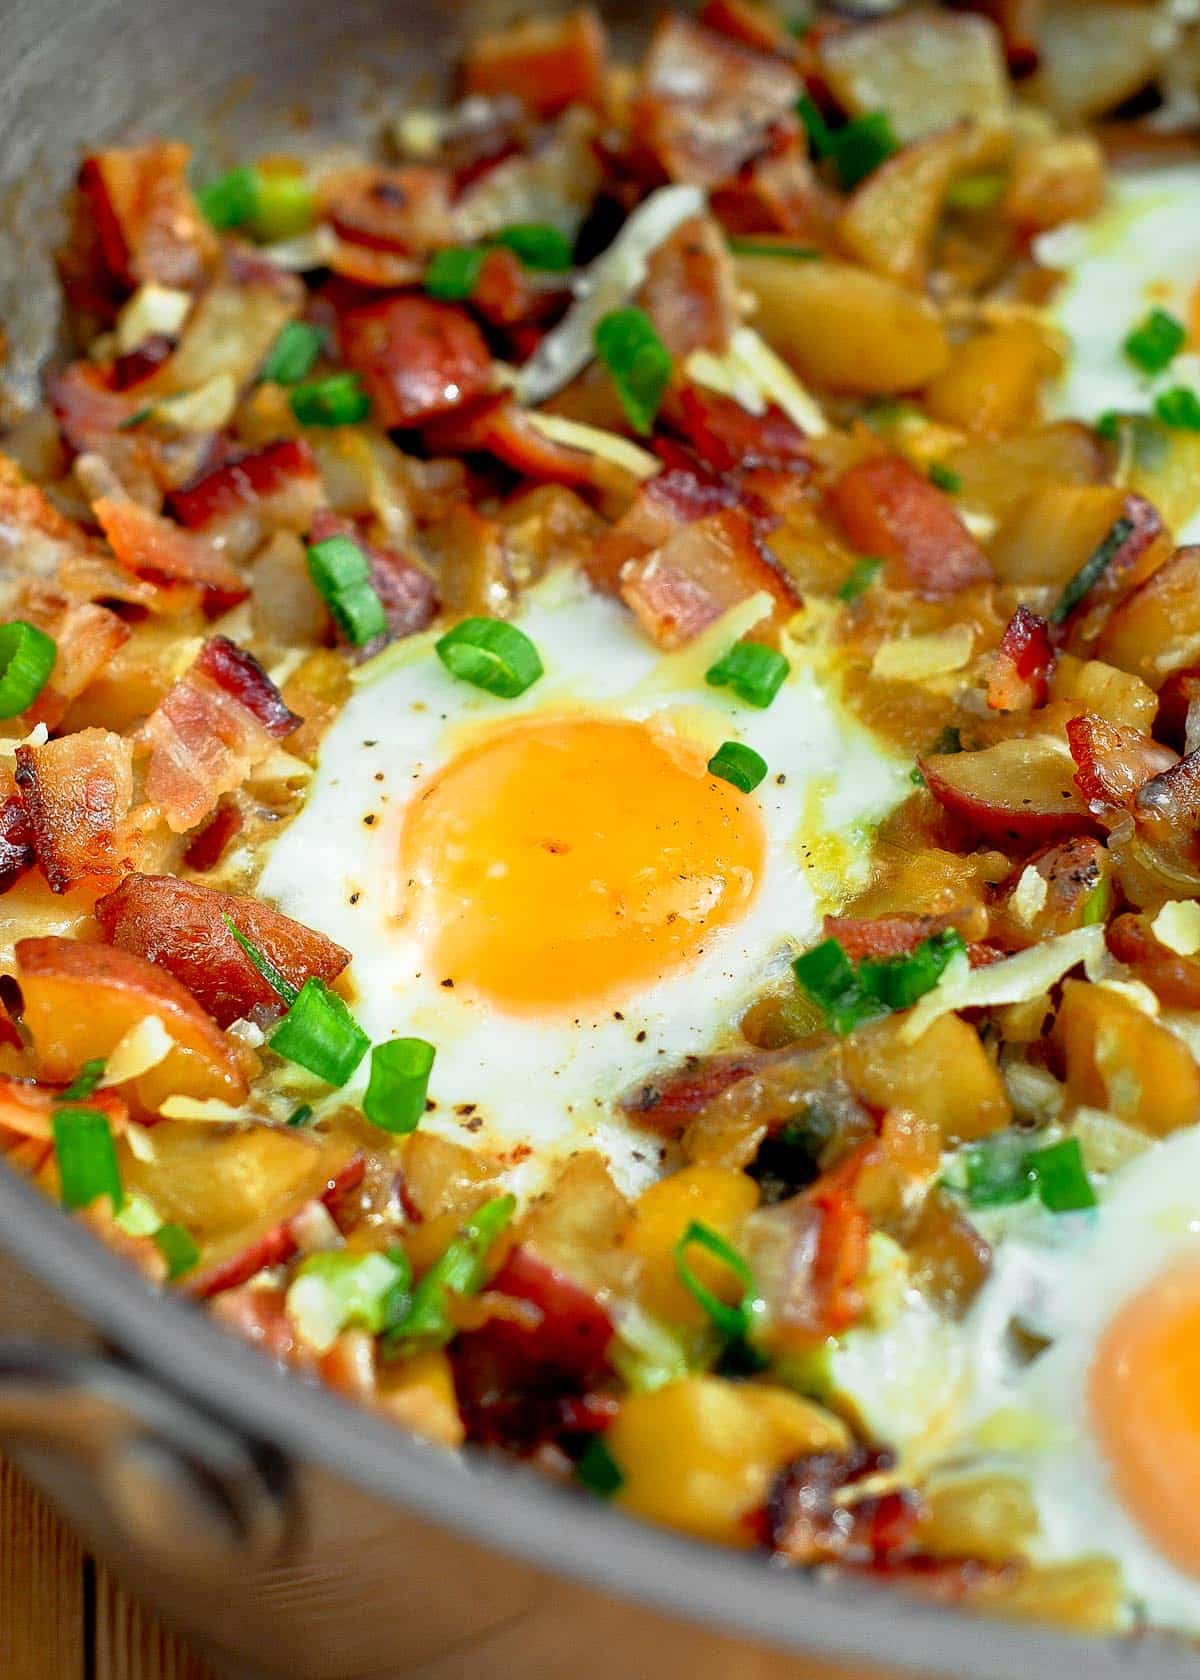 https://whatsinthepan.com/wp-content/uploads/2022/08/Breakfast-Skillet-with-Bacon-Potatoes-and-Eggs-2.jpg